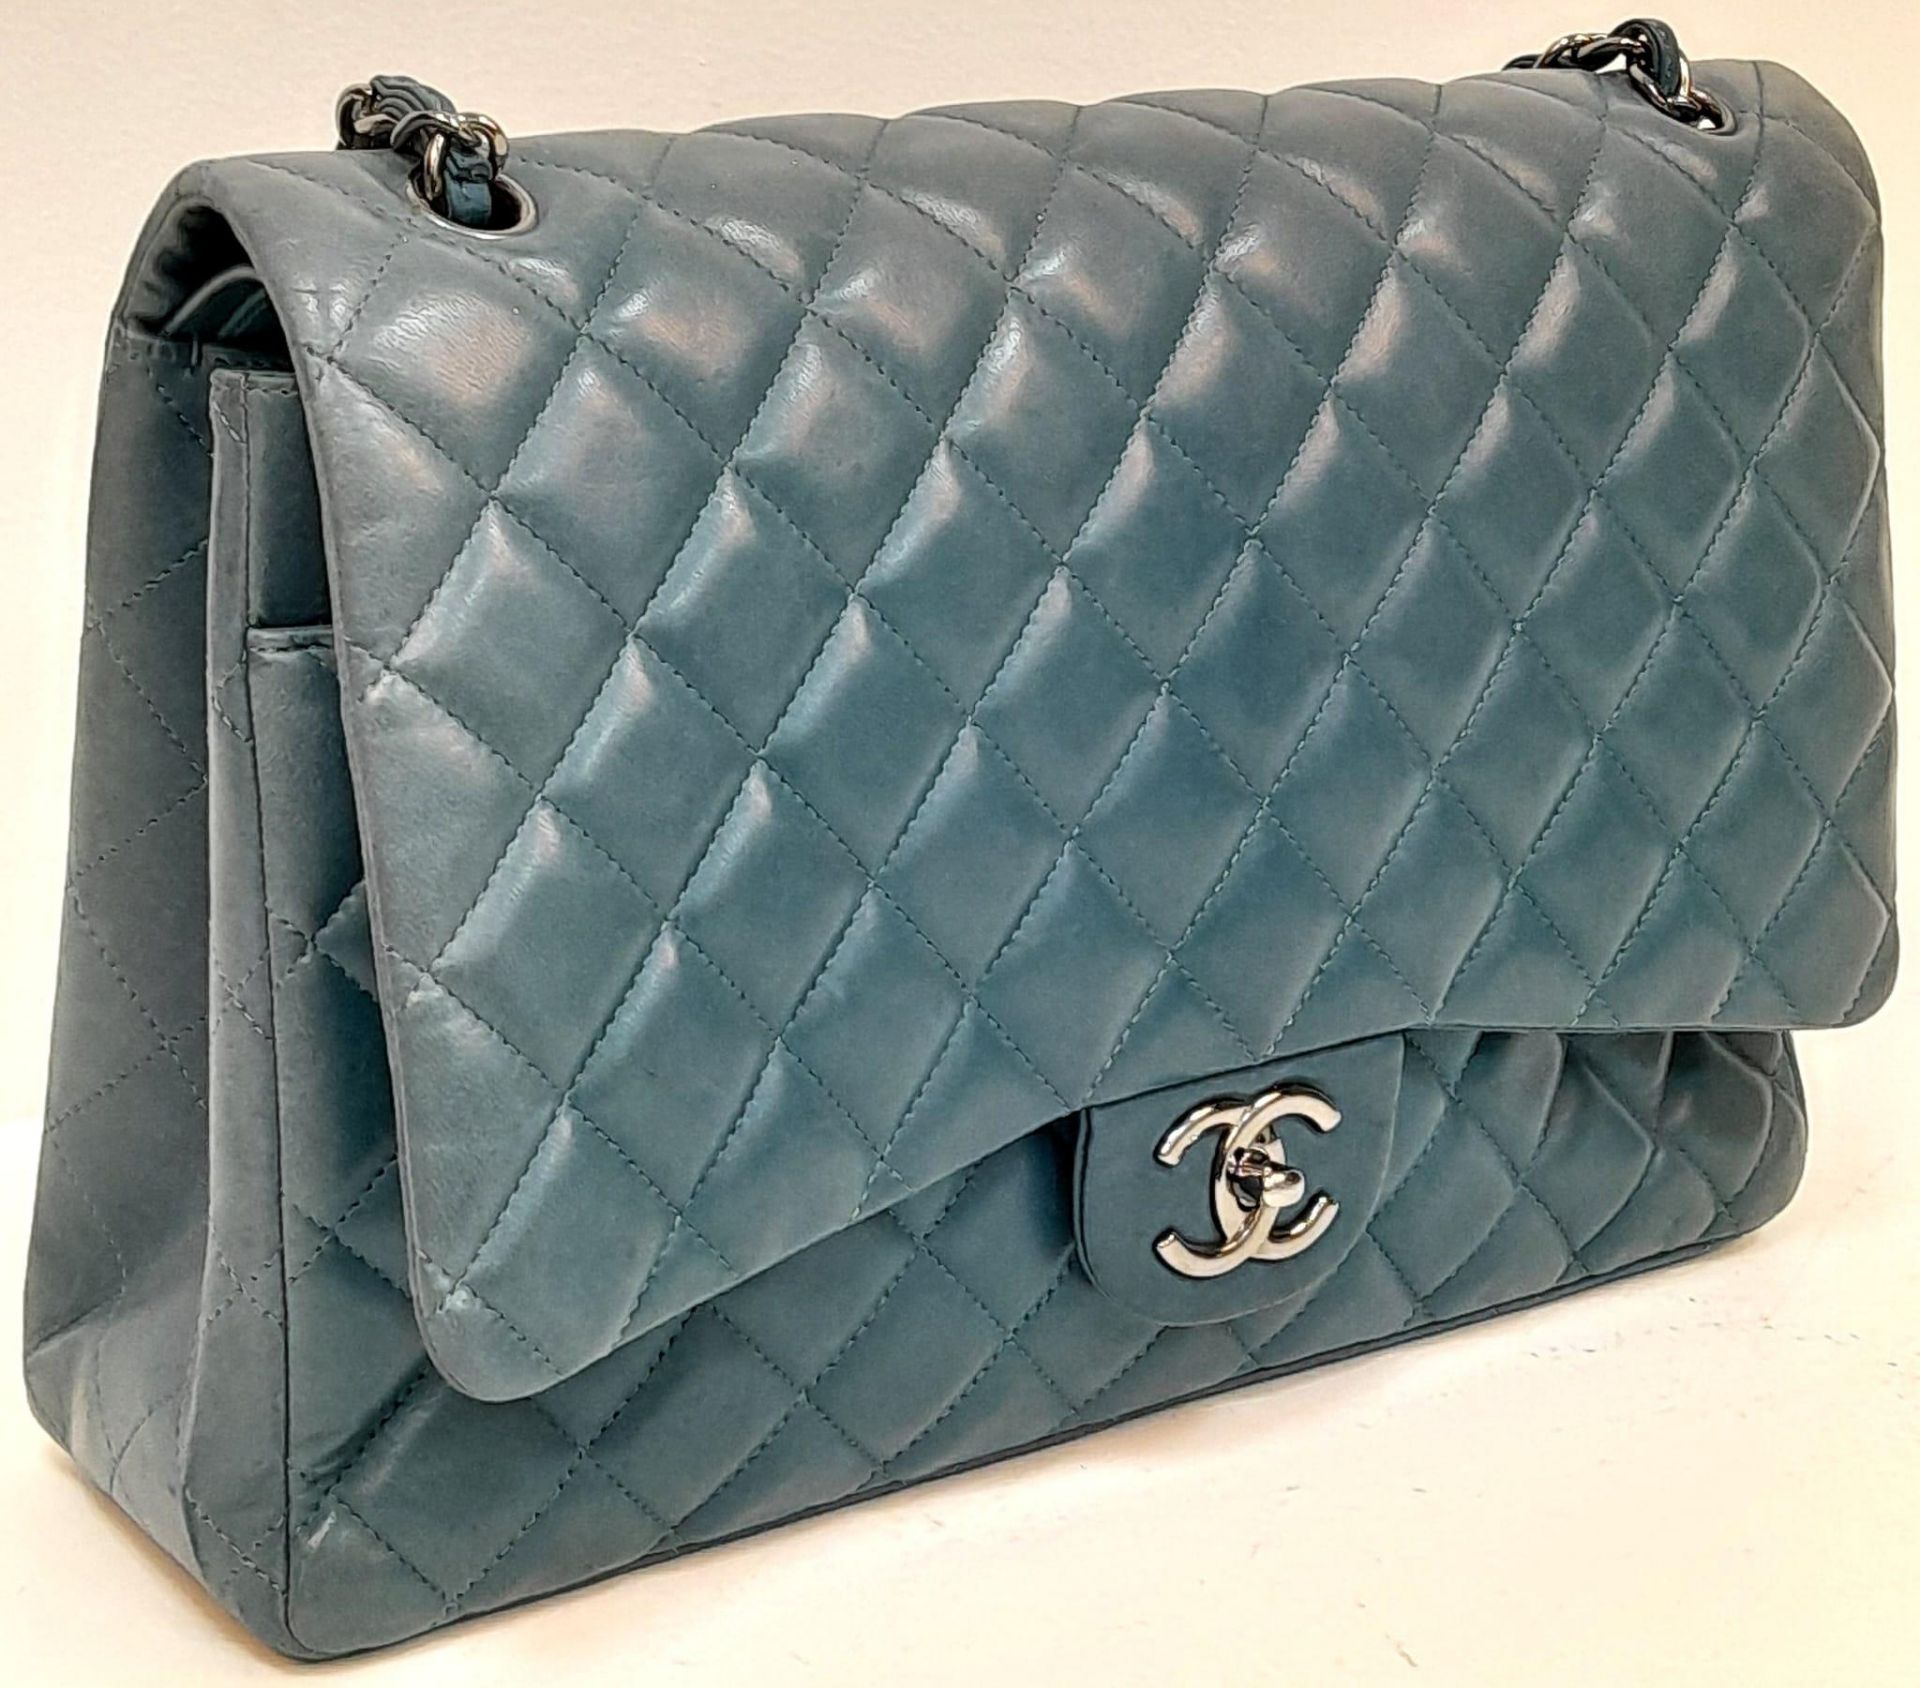 A Chanel Teal Jumbo Classic Double Flap Bag. Quilted leather exterior with silver-toned hardware, - Bild 6 aus 14